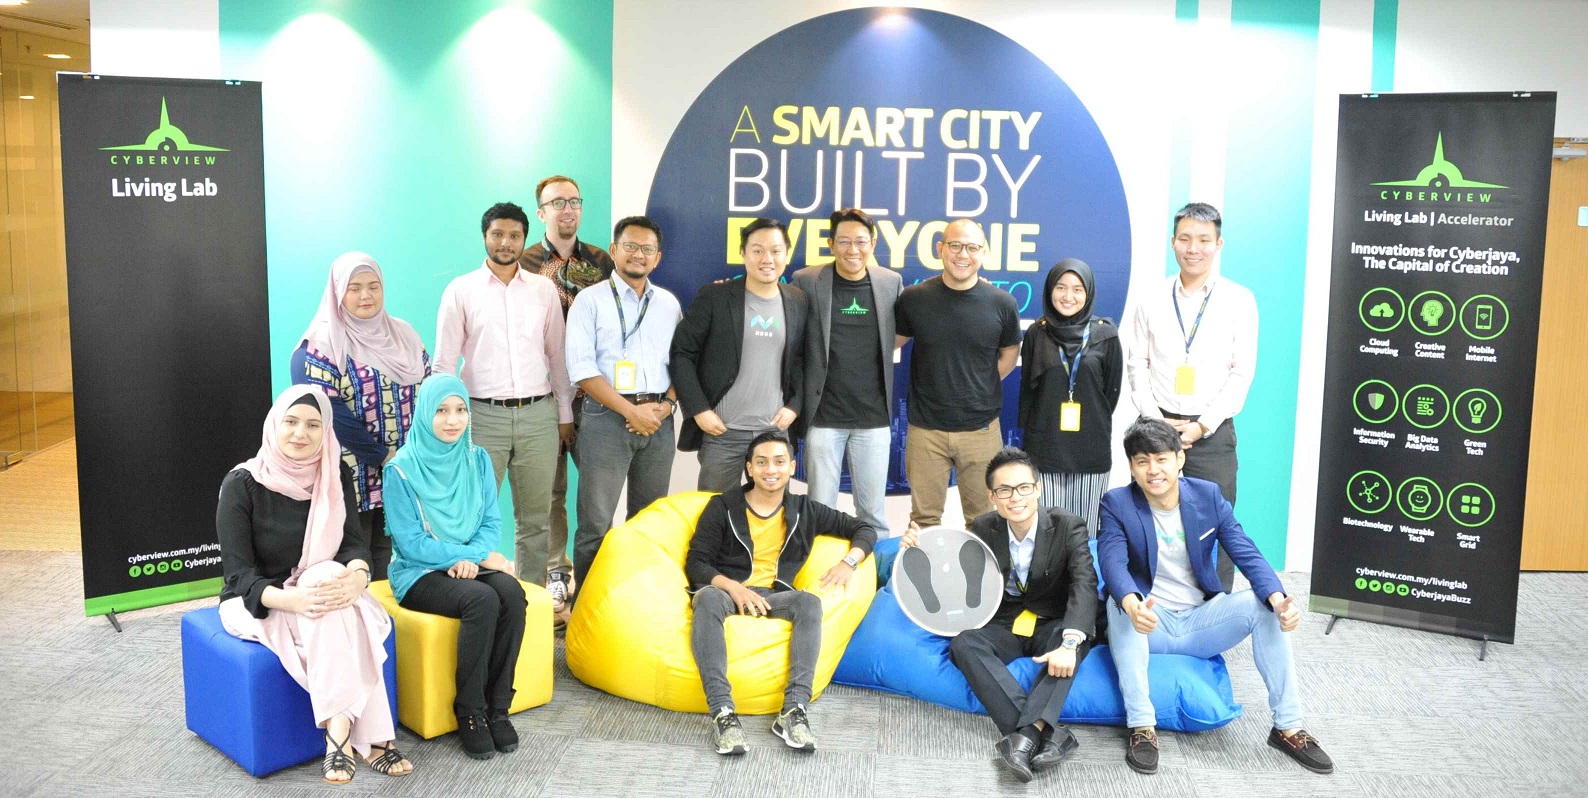 Cyberview Living Lab Accelerator focuses on fintech, IoT startups 